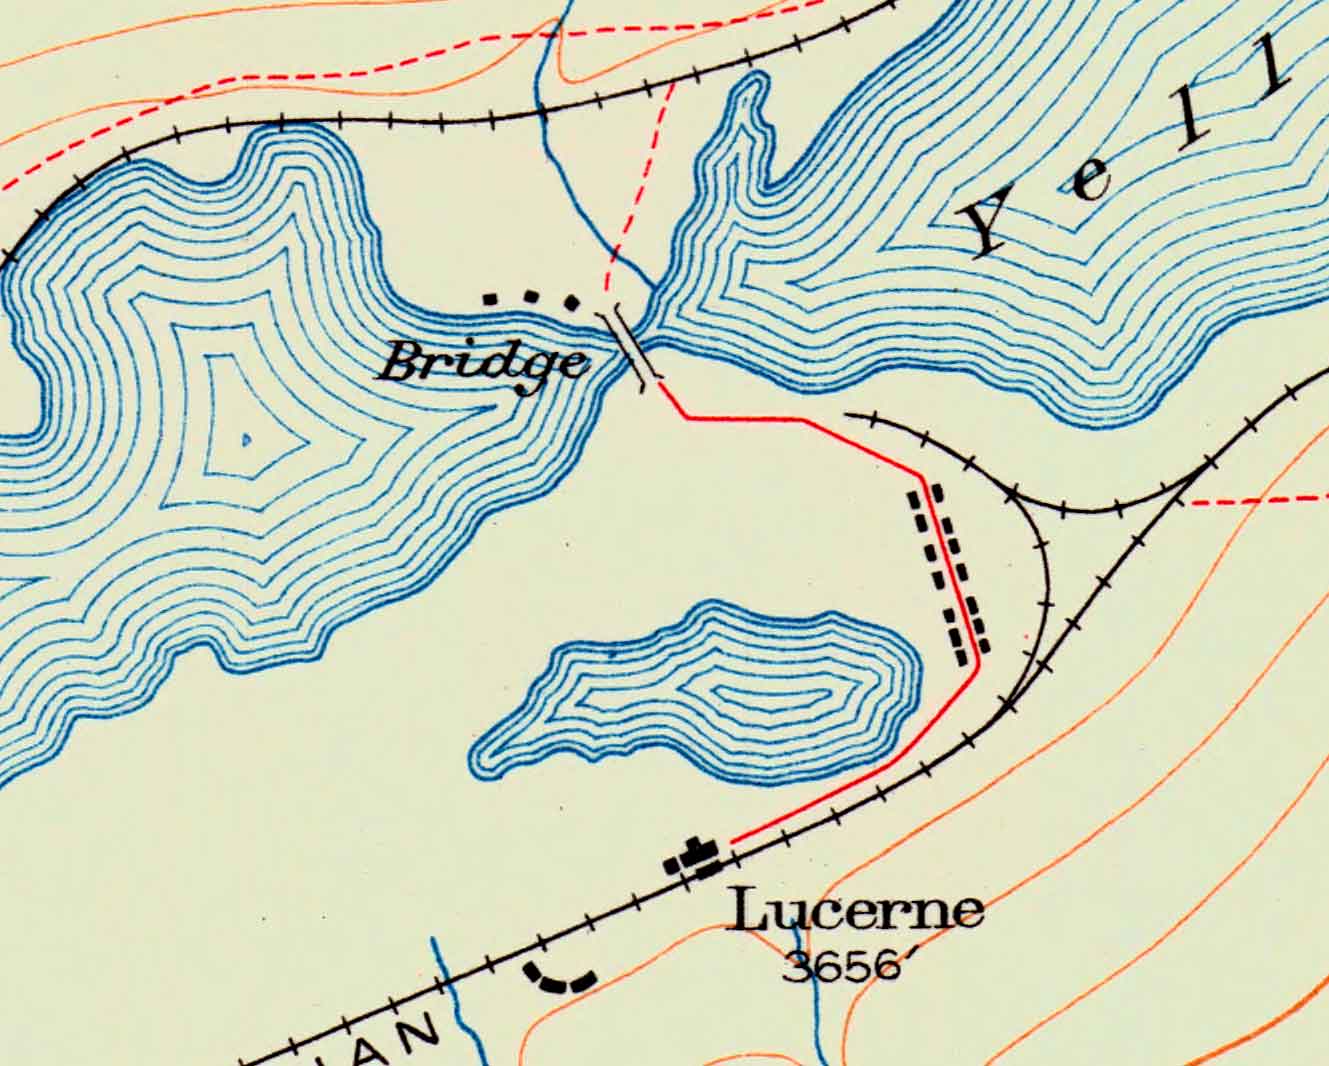 Lucerne. Surveyed in 1917. Boundary between Alberta and British Columbia. Detail.